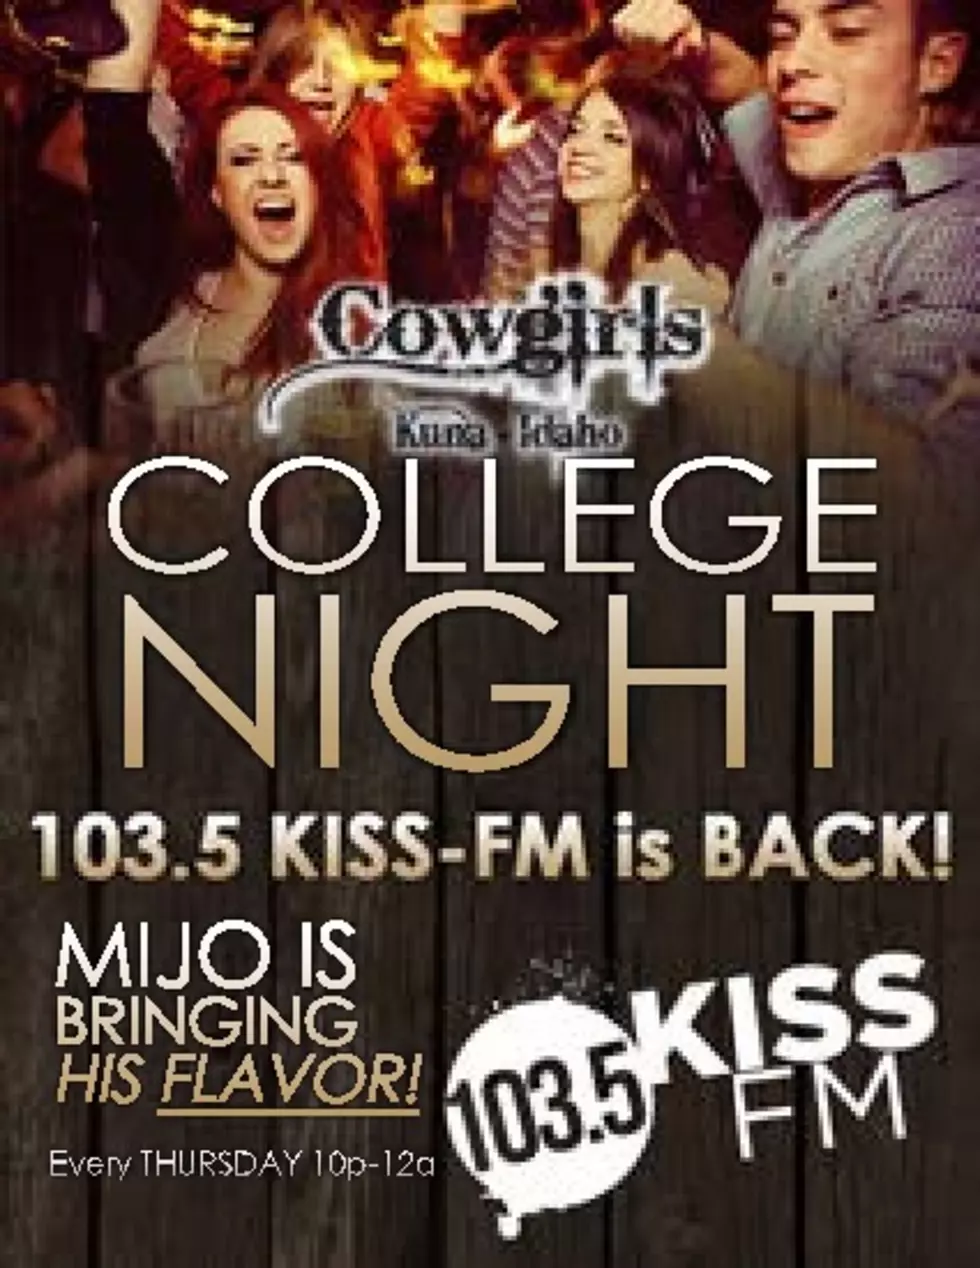 We're Back at Cowgirls!